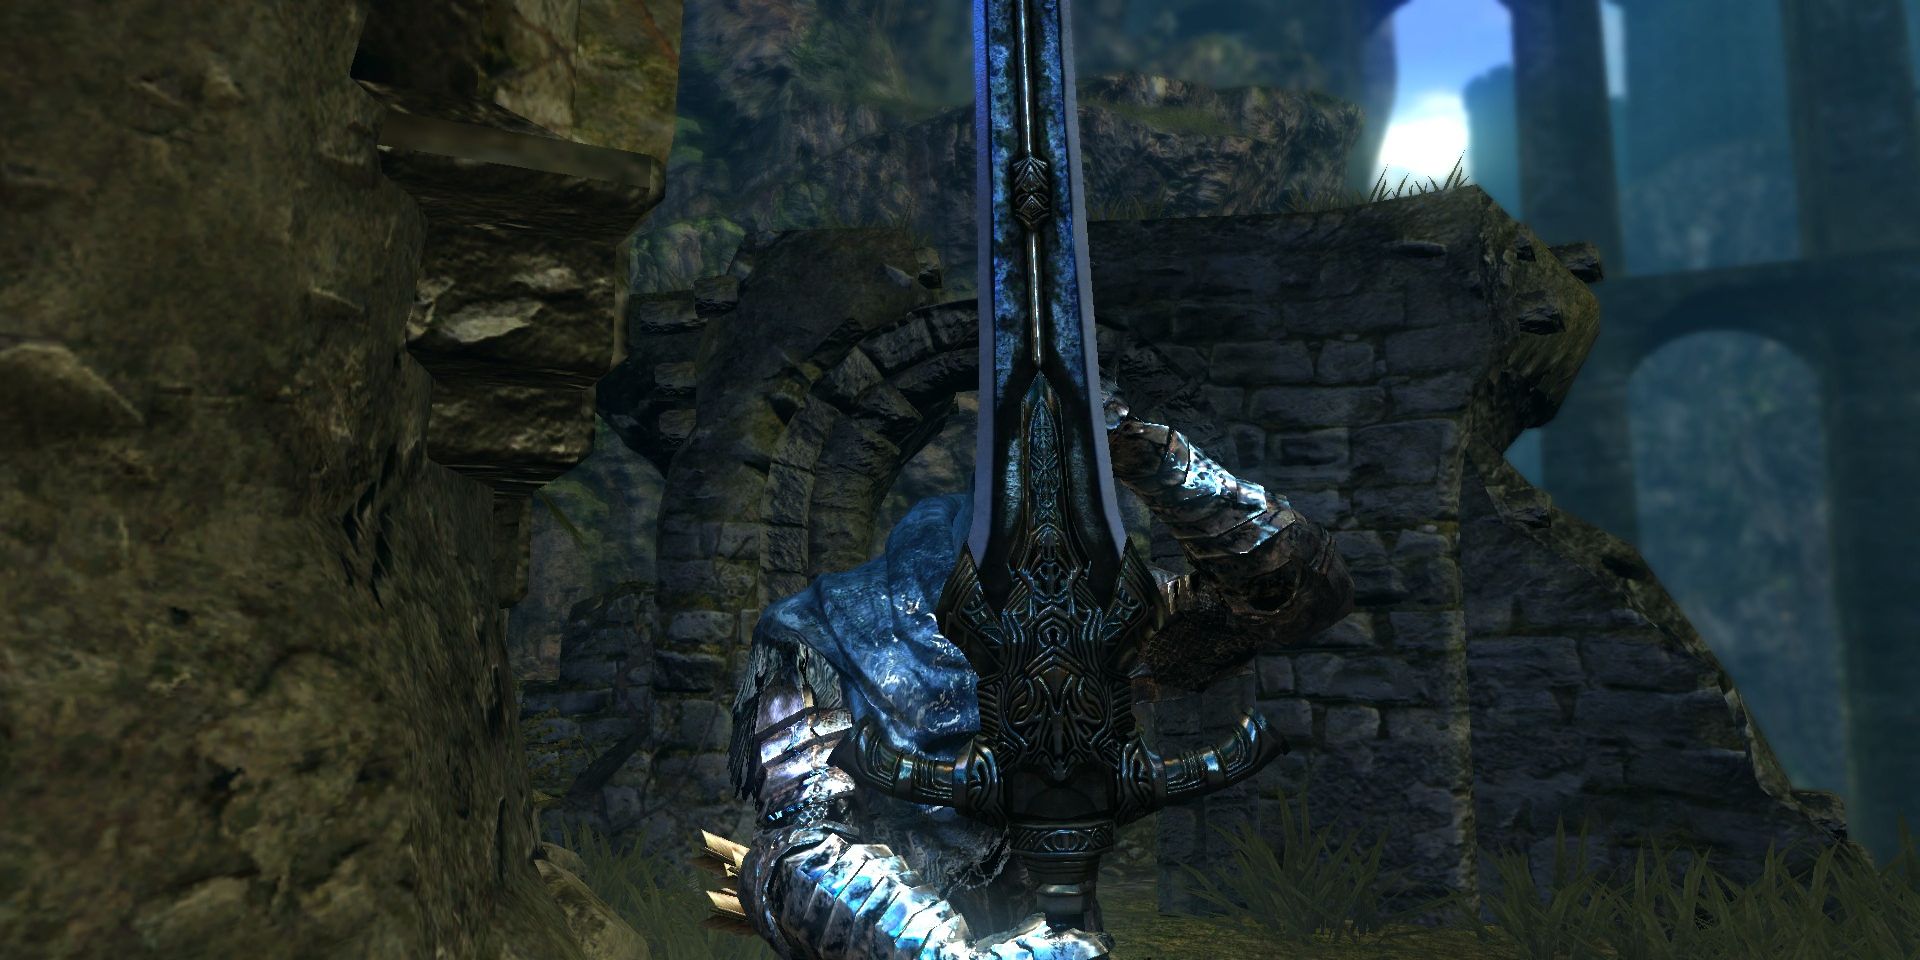 The Greatsword of Artorias in the first Dark Souls game.